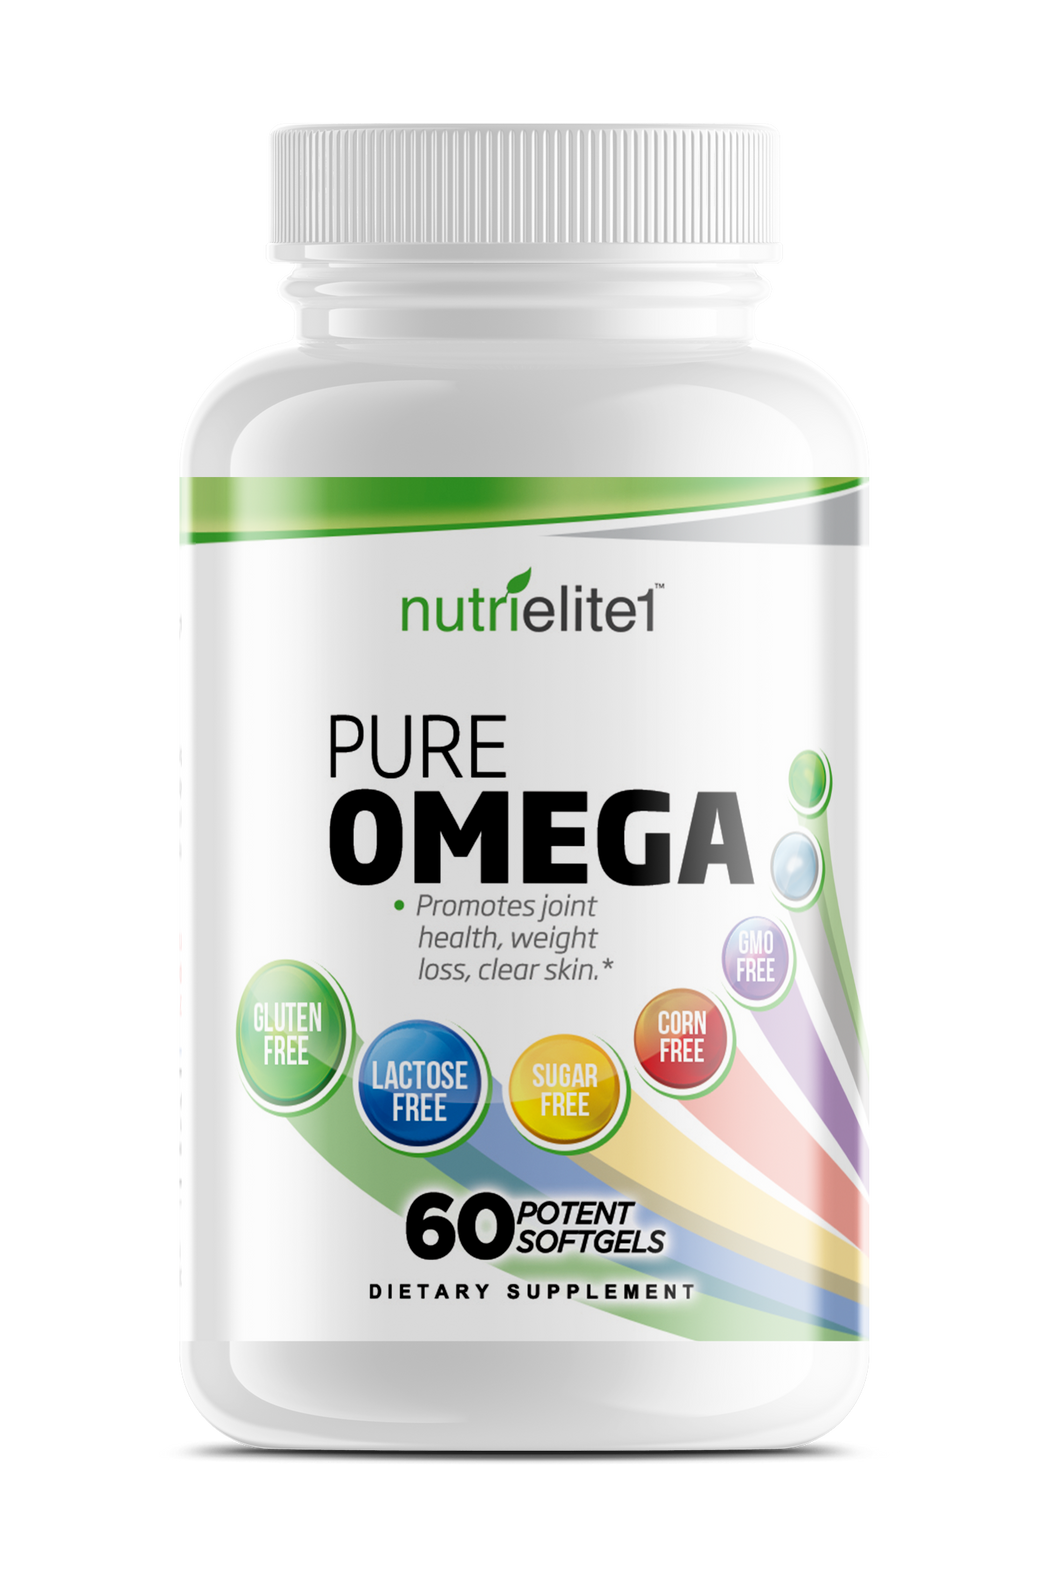 PURE OMEGA™ NATURAL OIL – Supplements